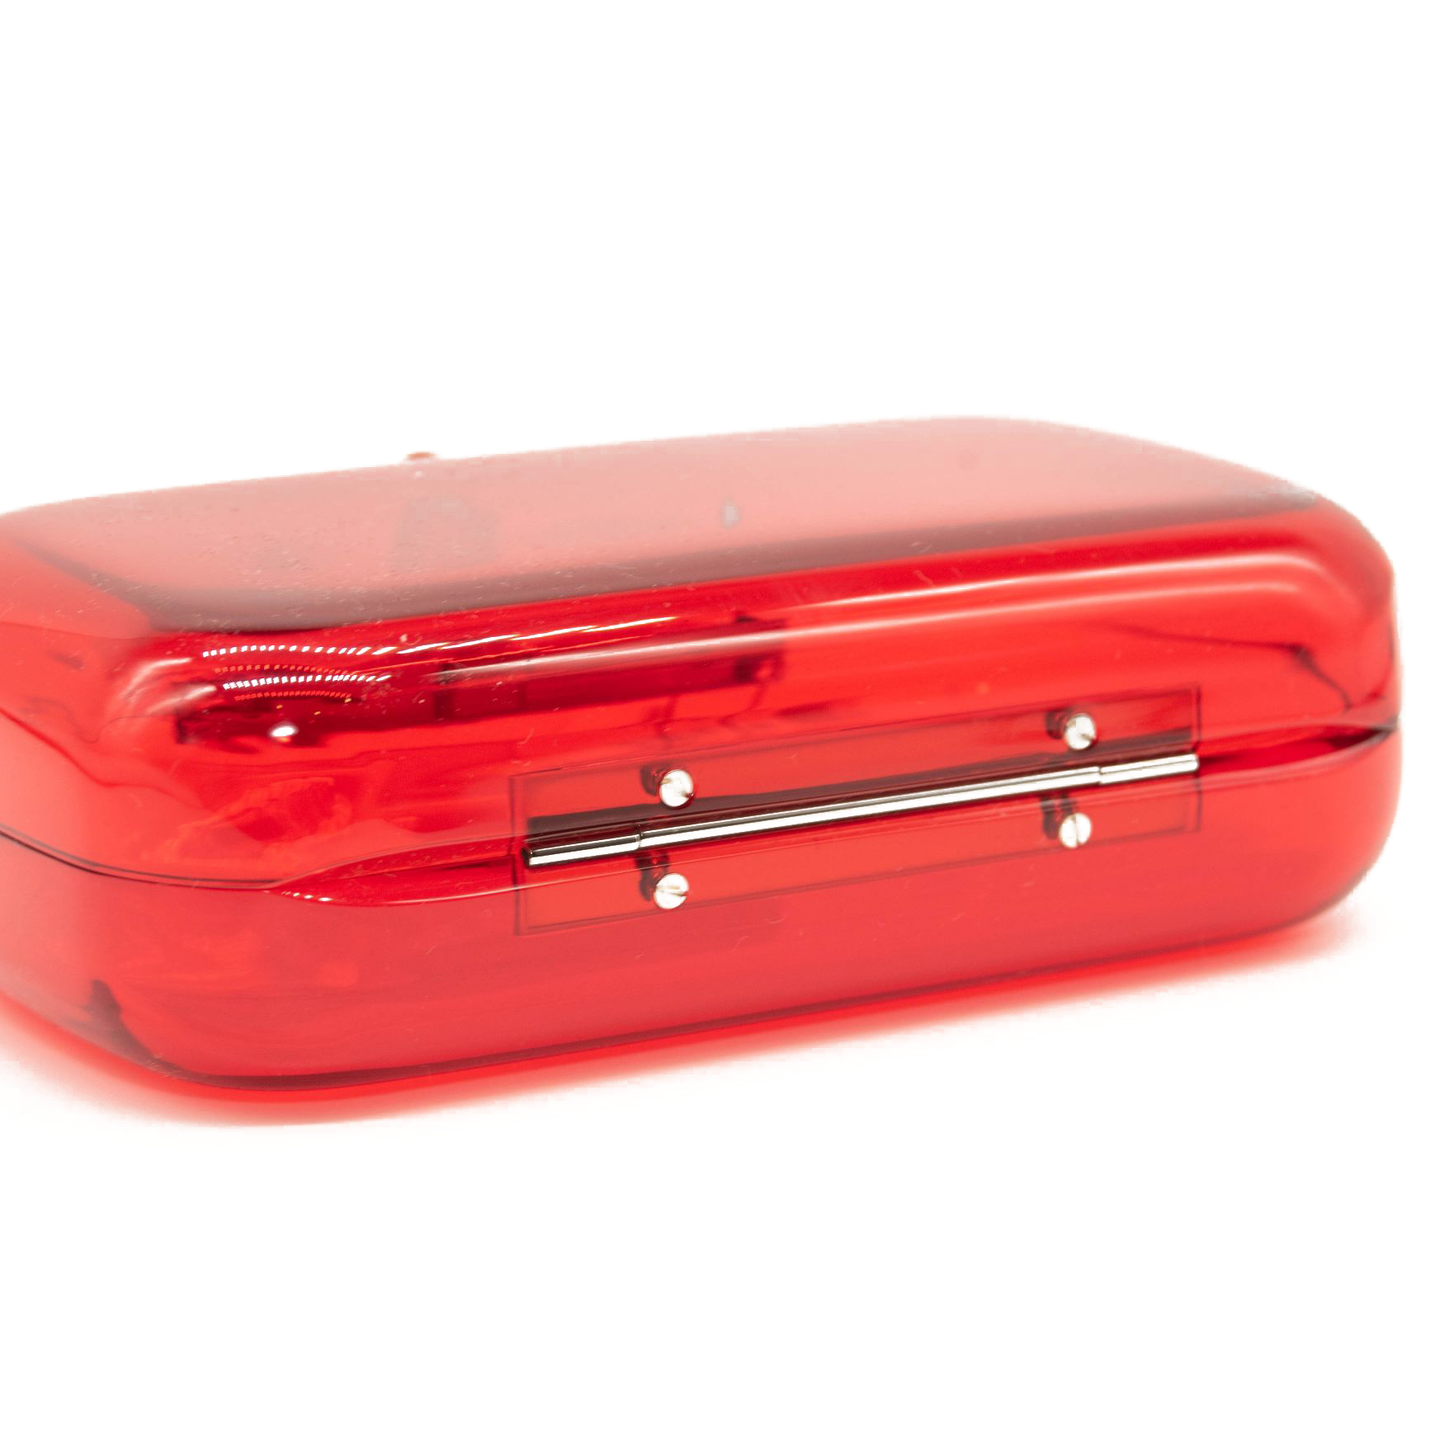 NEW Alexander McQueen Four-Ring Clear Box Clutch Dark Coral Red